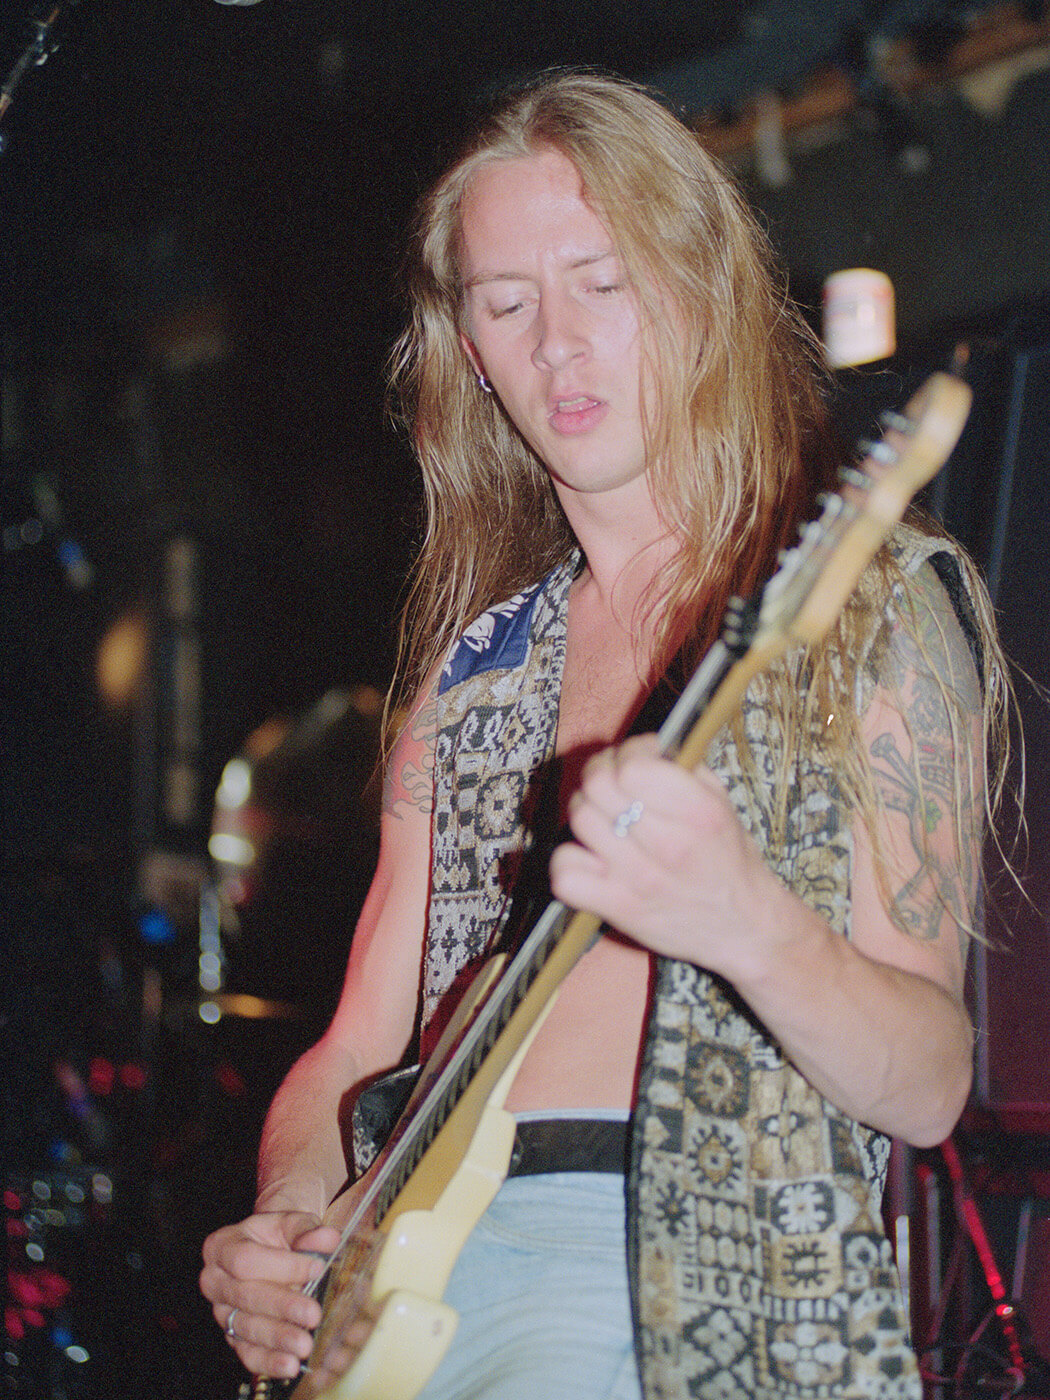 Jerry Cantrell performing in 1992, photo by Brian Rasic/Getty Images